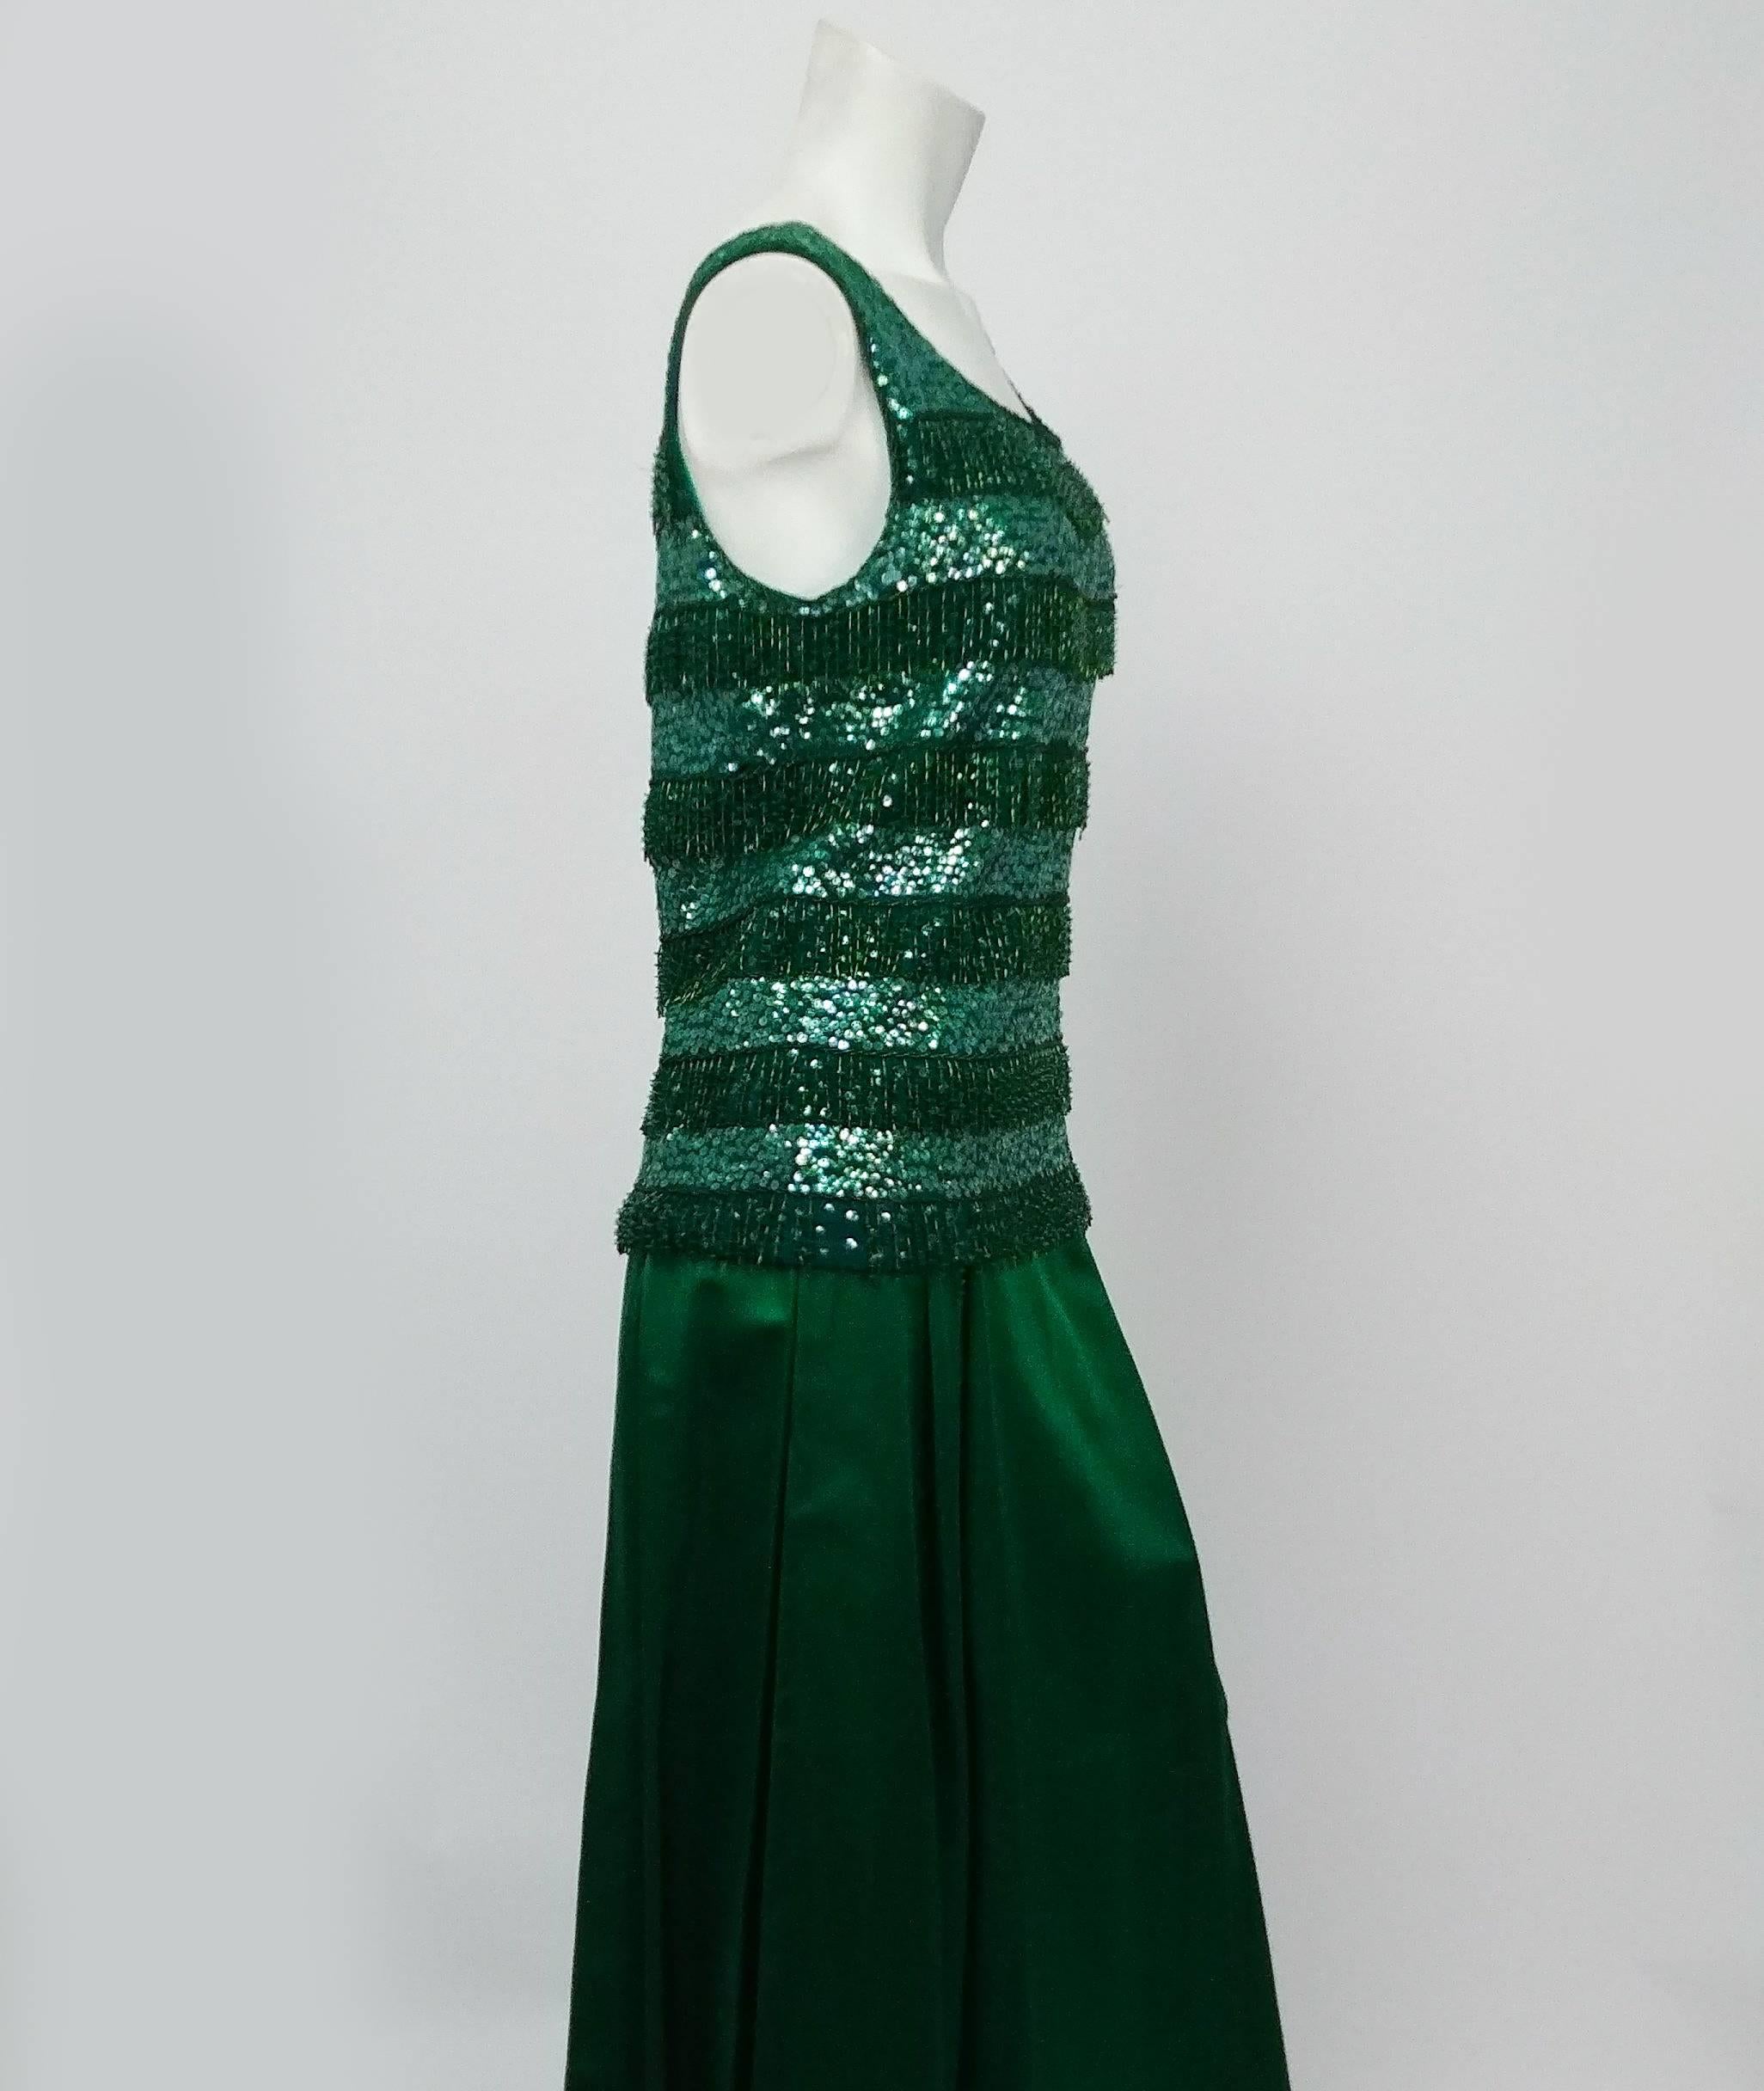 1960s Emerald Green Sequin Top & Satin Evening Skirt. Knit top fully beaded and sequined, zips up back and lined with silk. Long evening skirt is a heavy, luscious satin, pleated at waist and zips up side.  